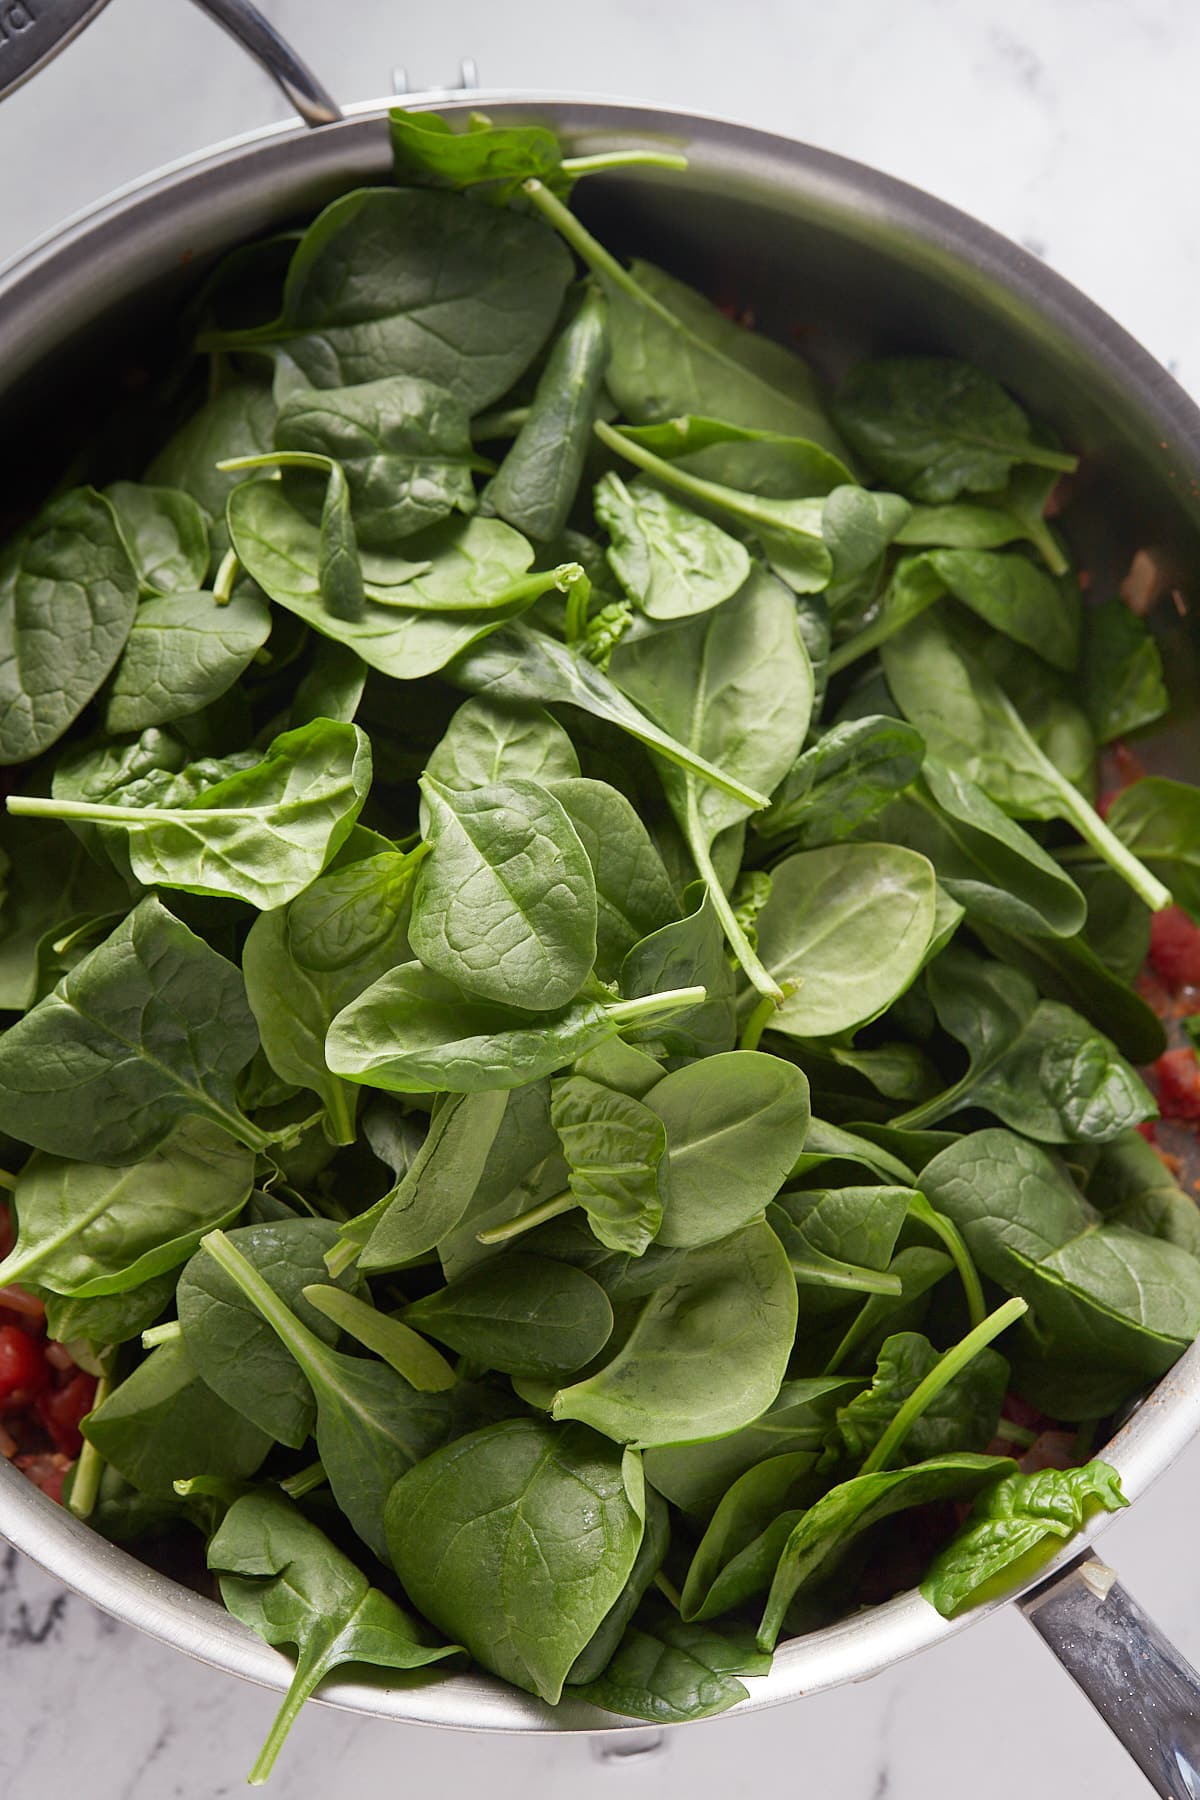 Spinach added to the skillet.